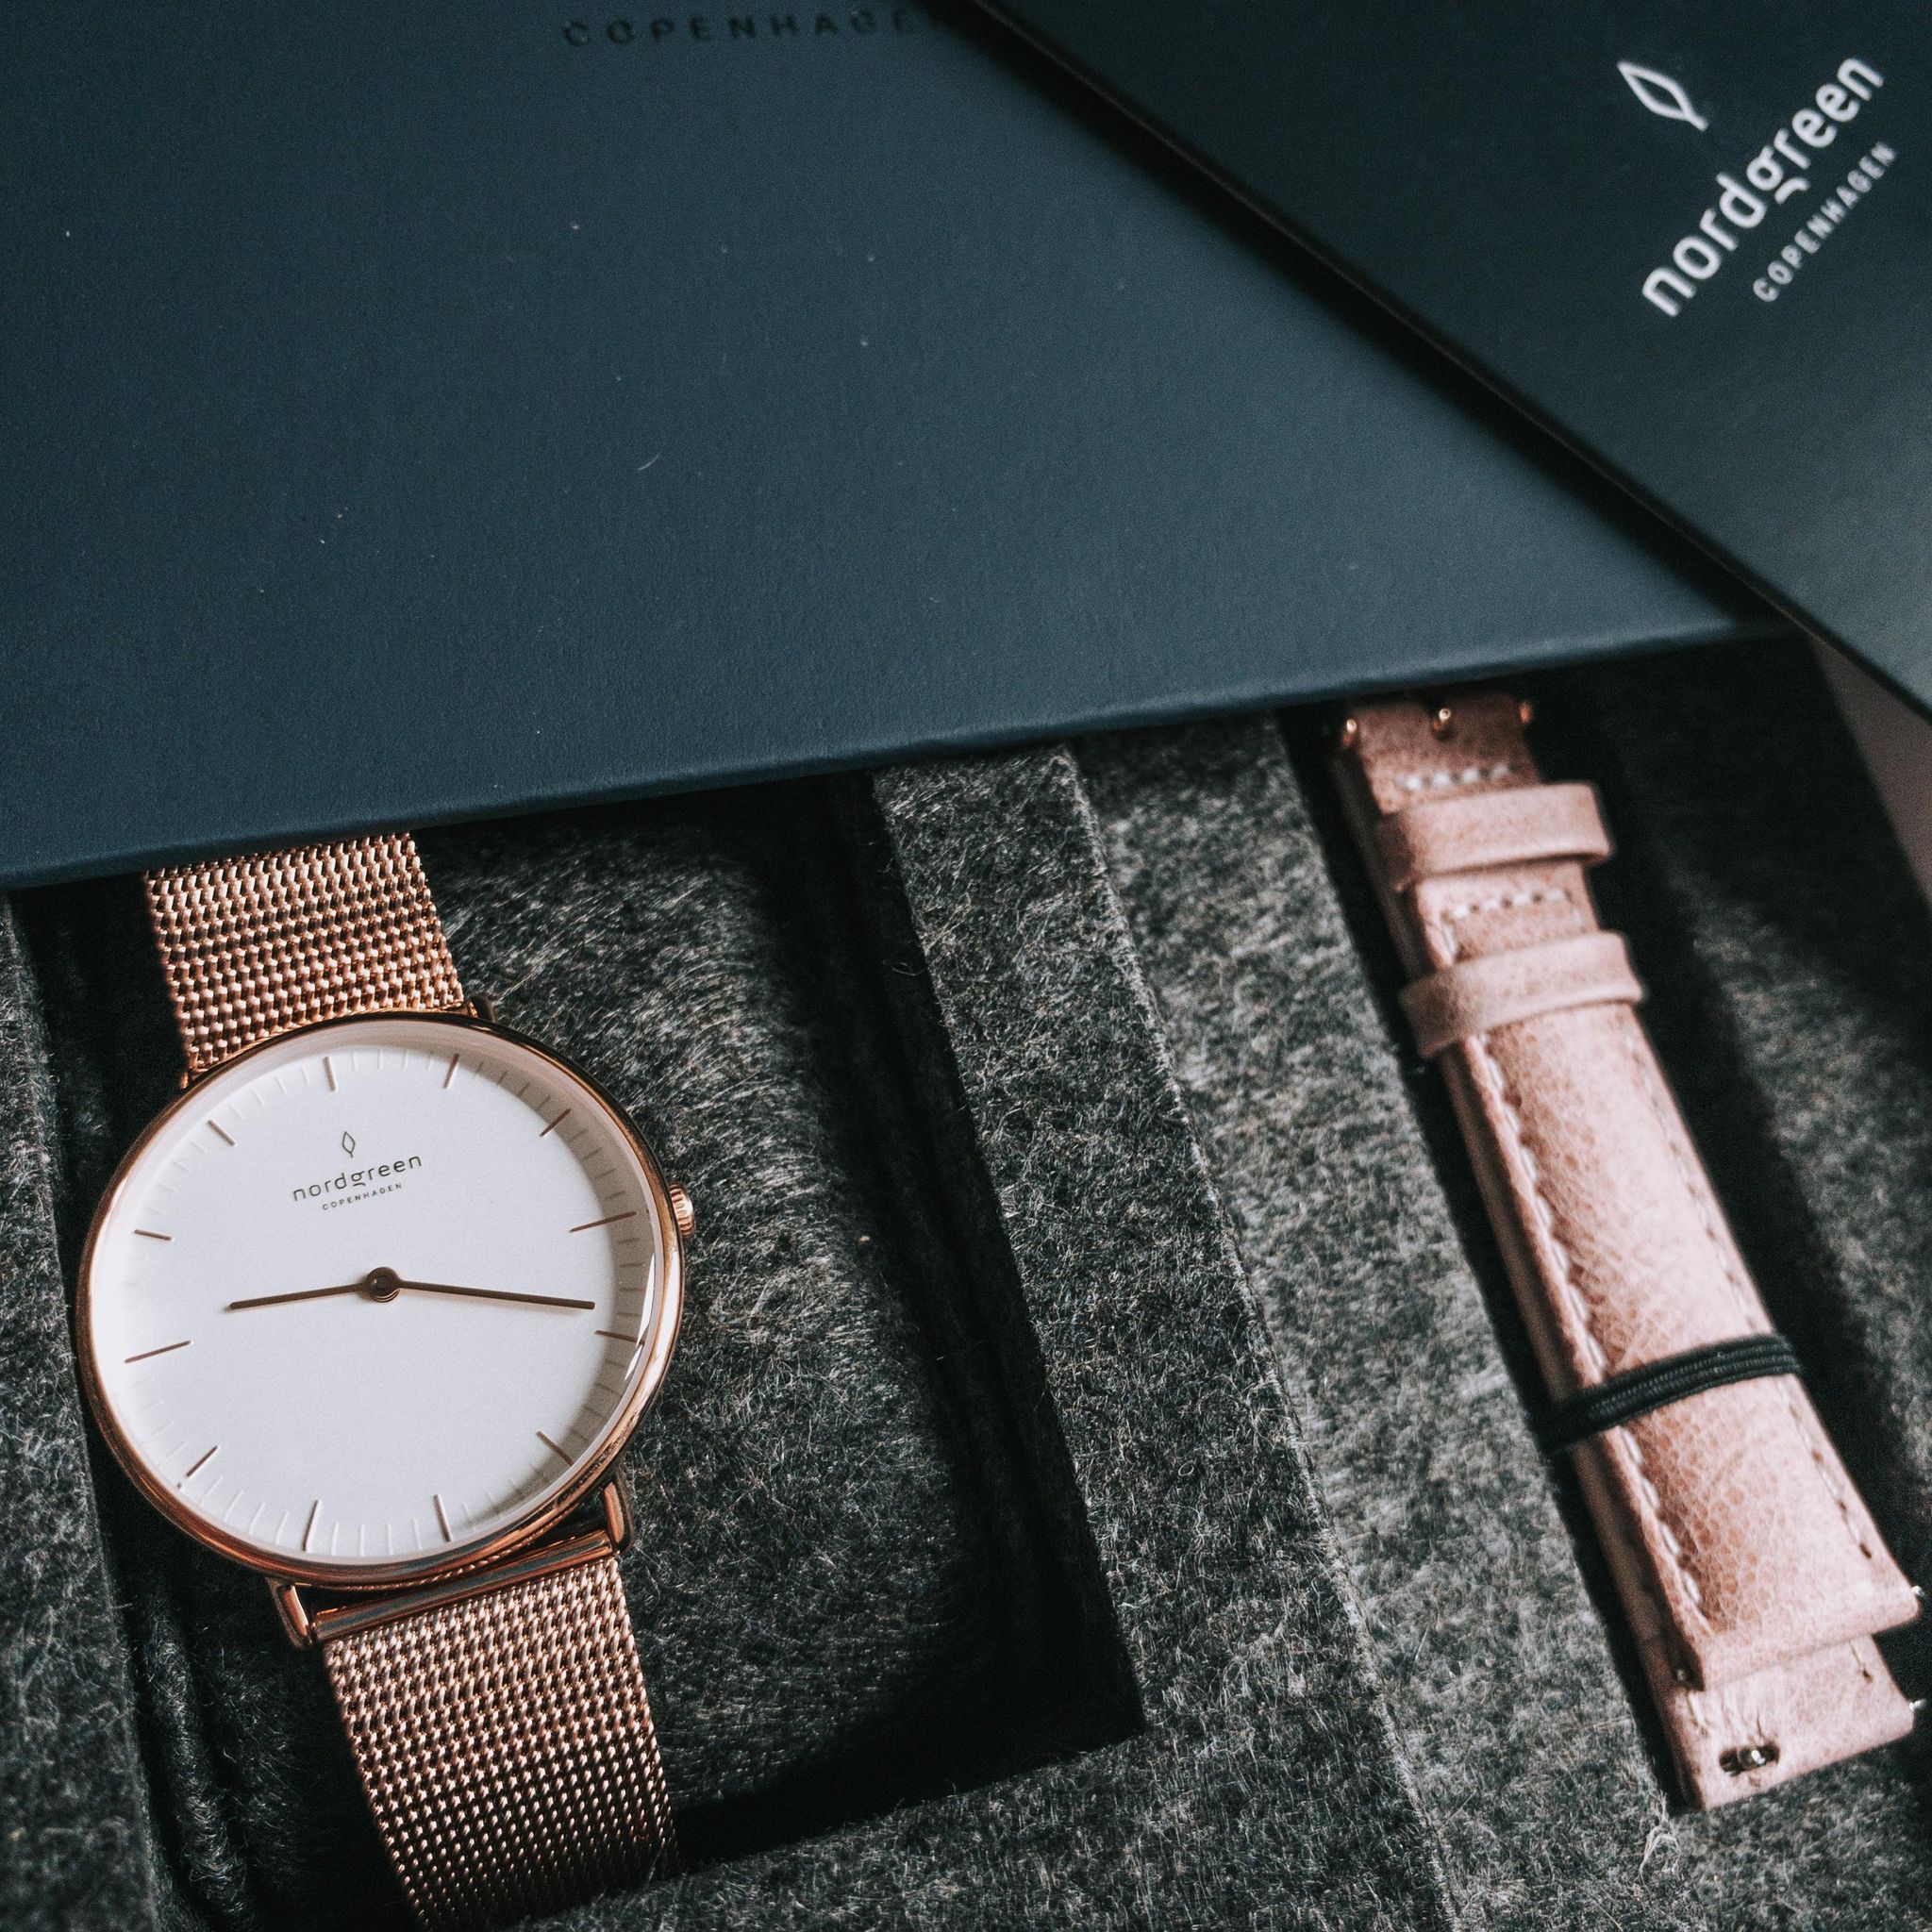 AD - Nordgreen Sustainable and ethical watches — Abi's Adventure